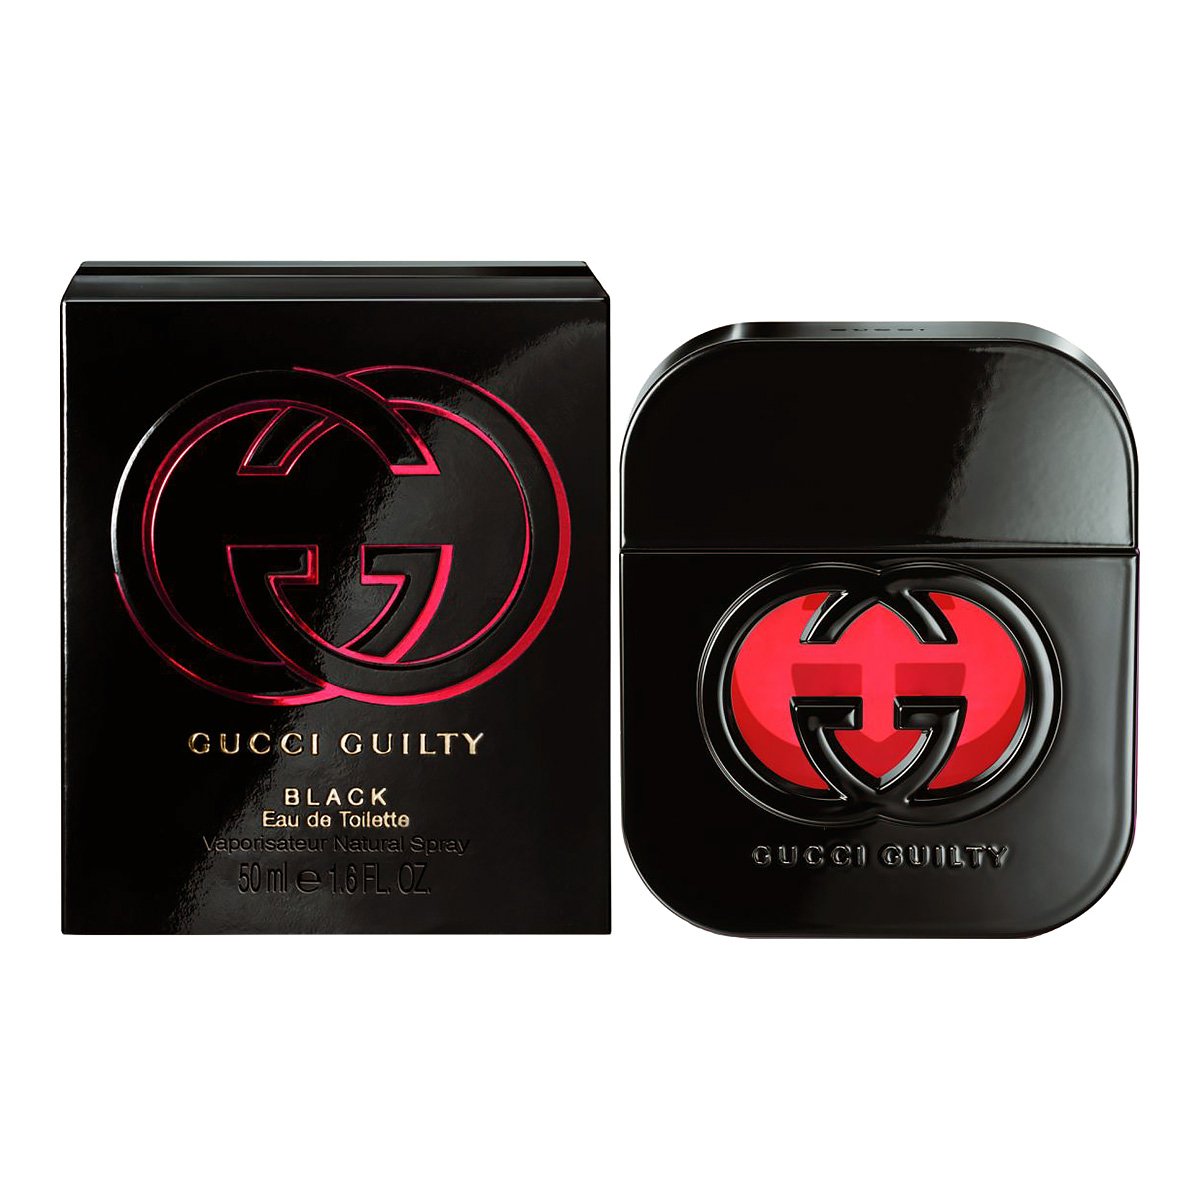 Gucci Guilty Black edt